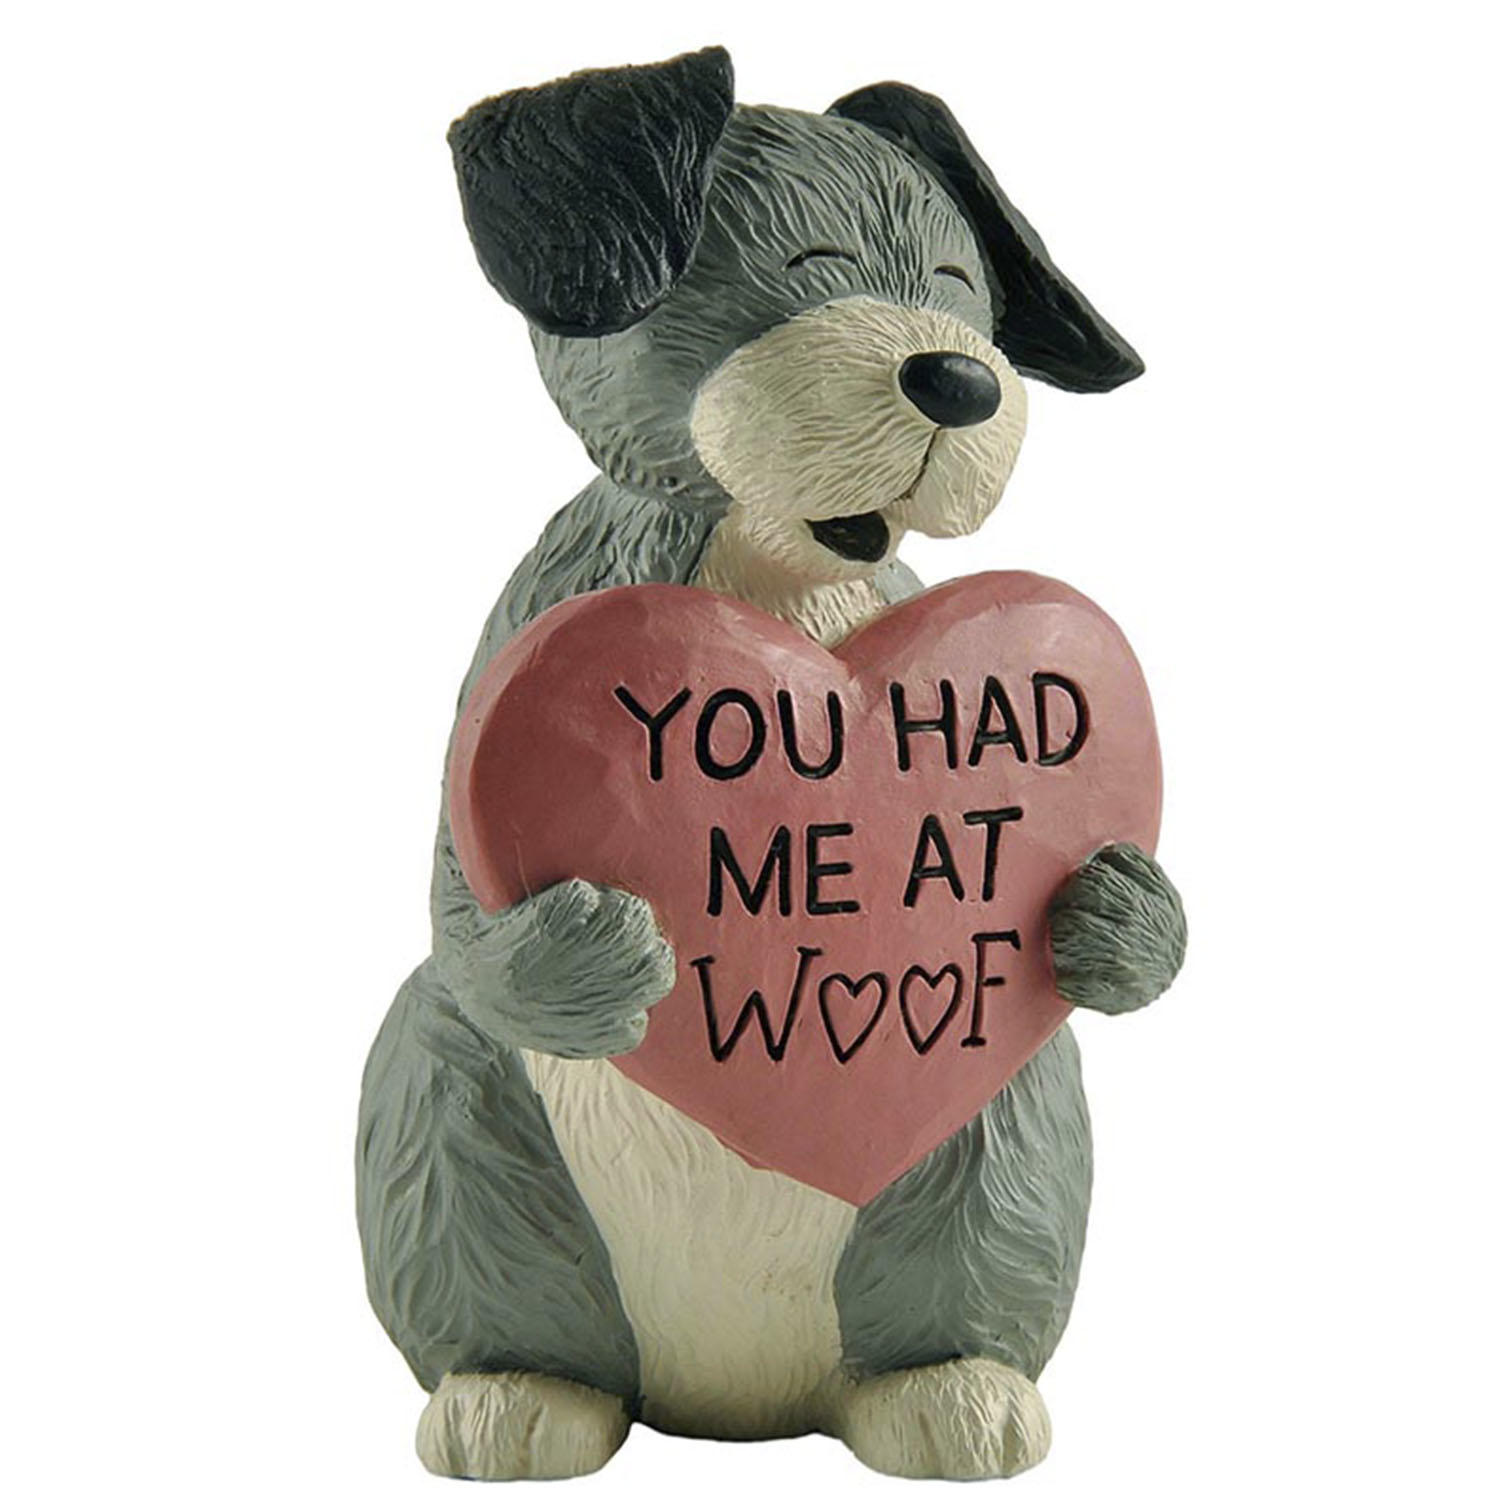 Amazon 3.54” H Cute Dog Holding A Pink ‘YOU HAD ME AT WOOF’ Resin Craft Home Décor 2166-13327